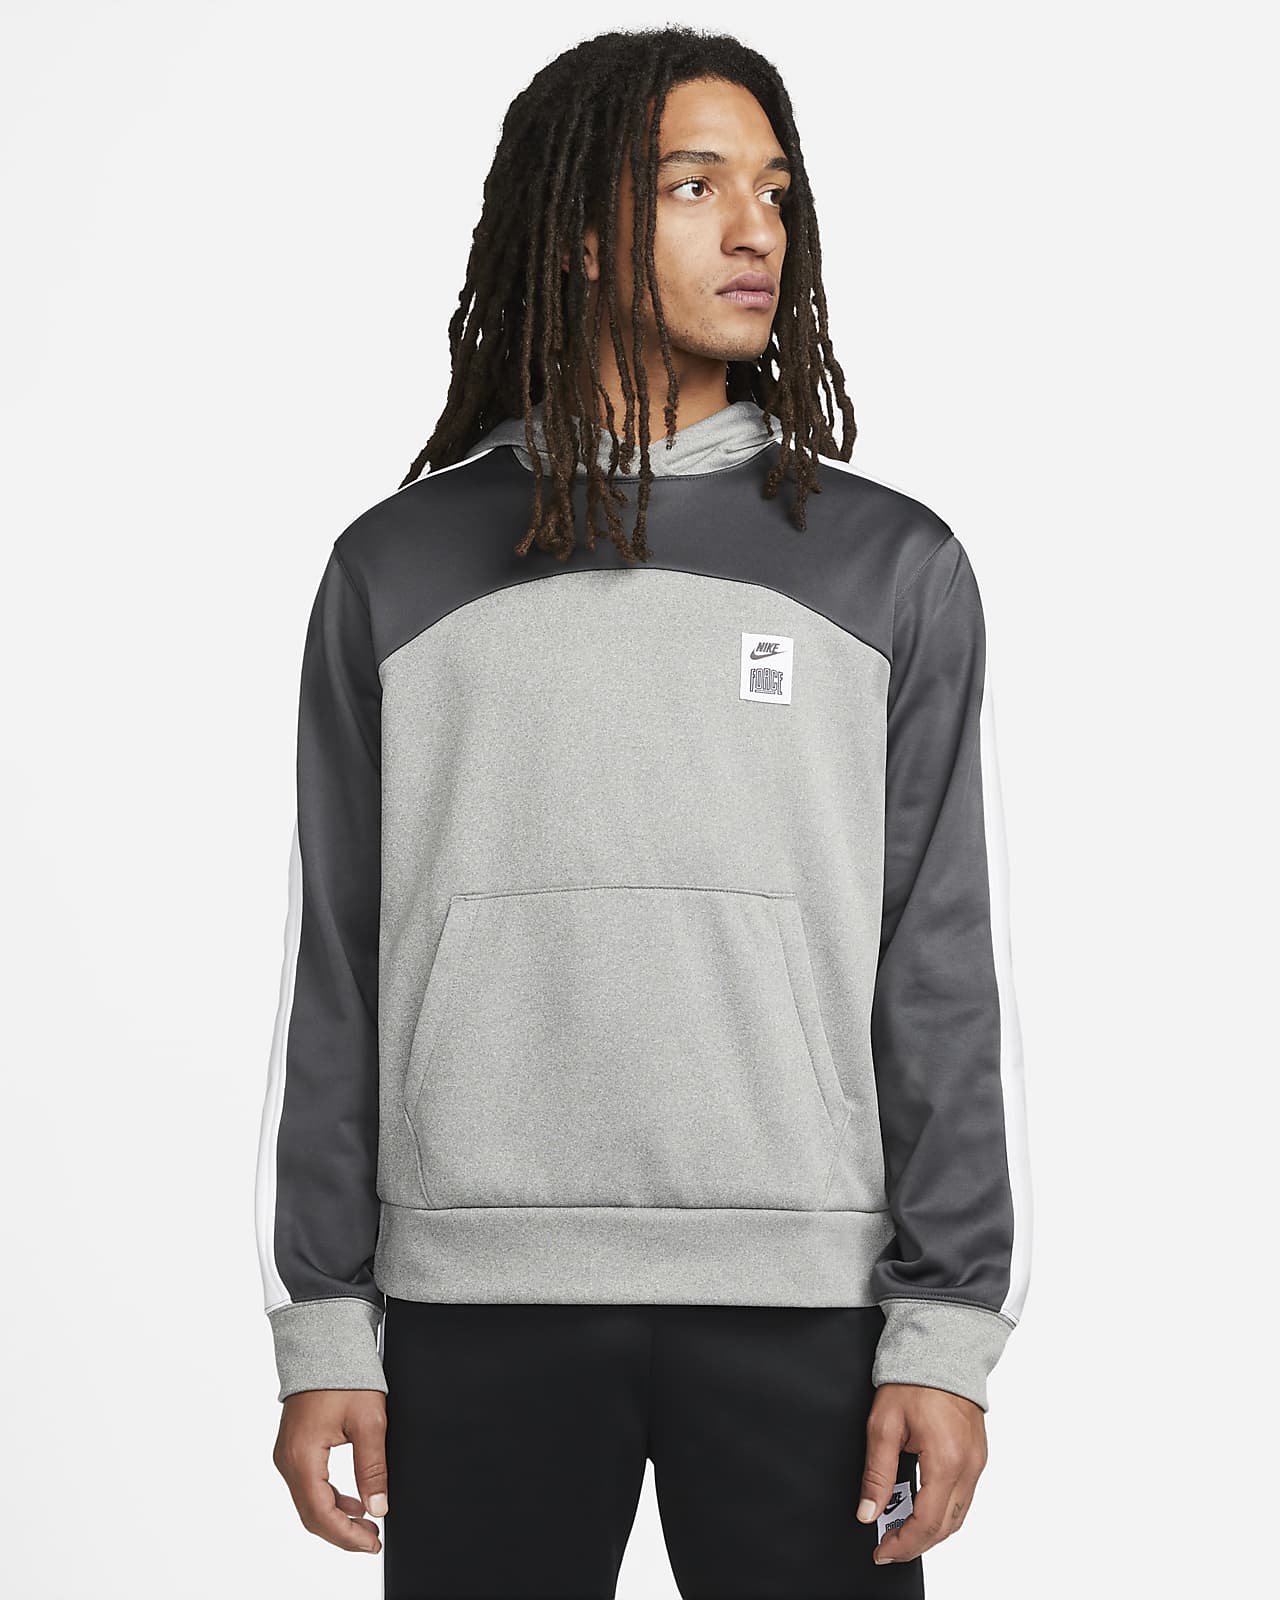 Sweat à capuche de basketball Therma-FIT Nike Starting 5 pour homme